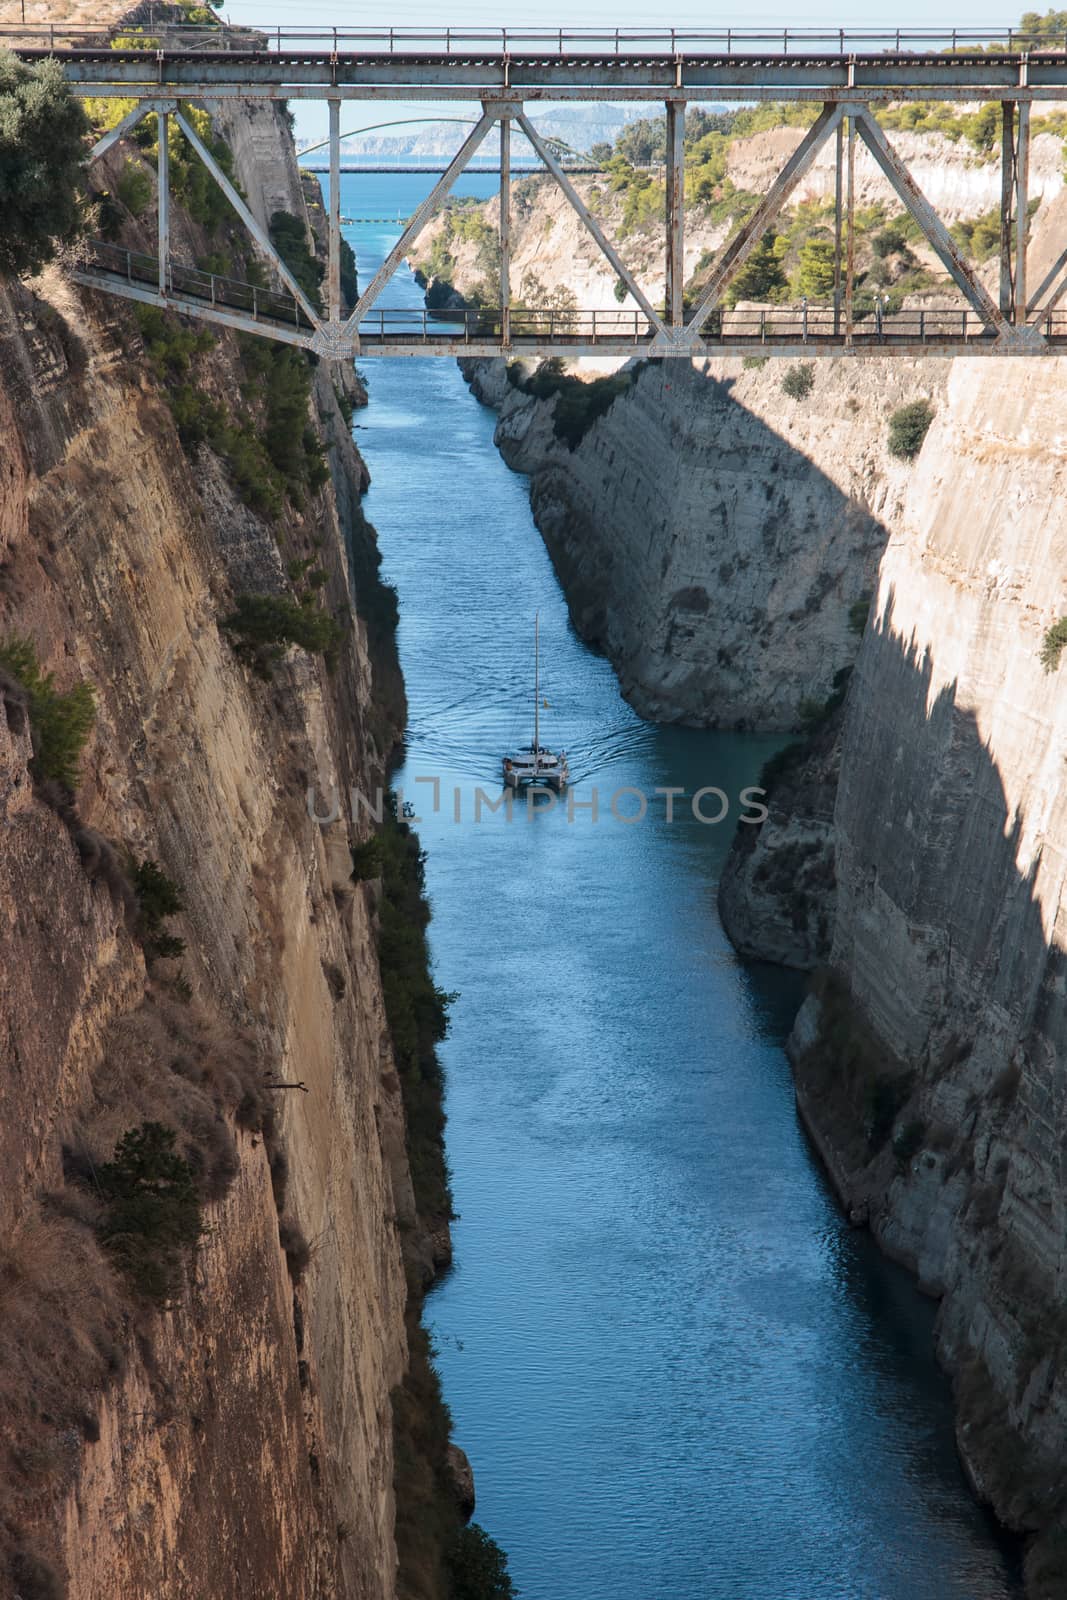 The Corinth Canal by RnDmS